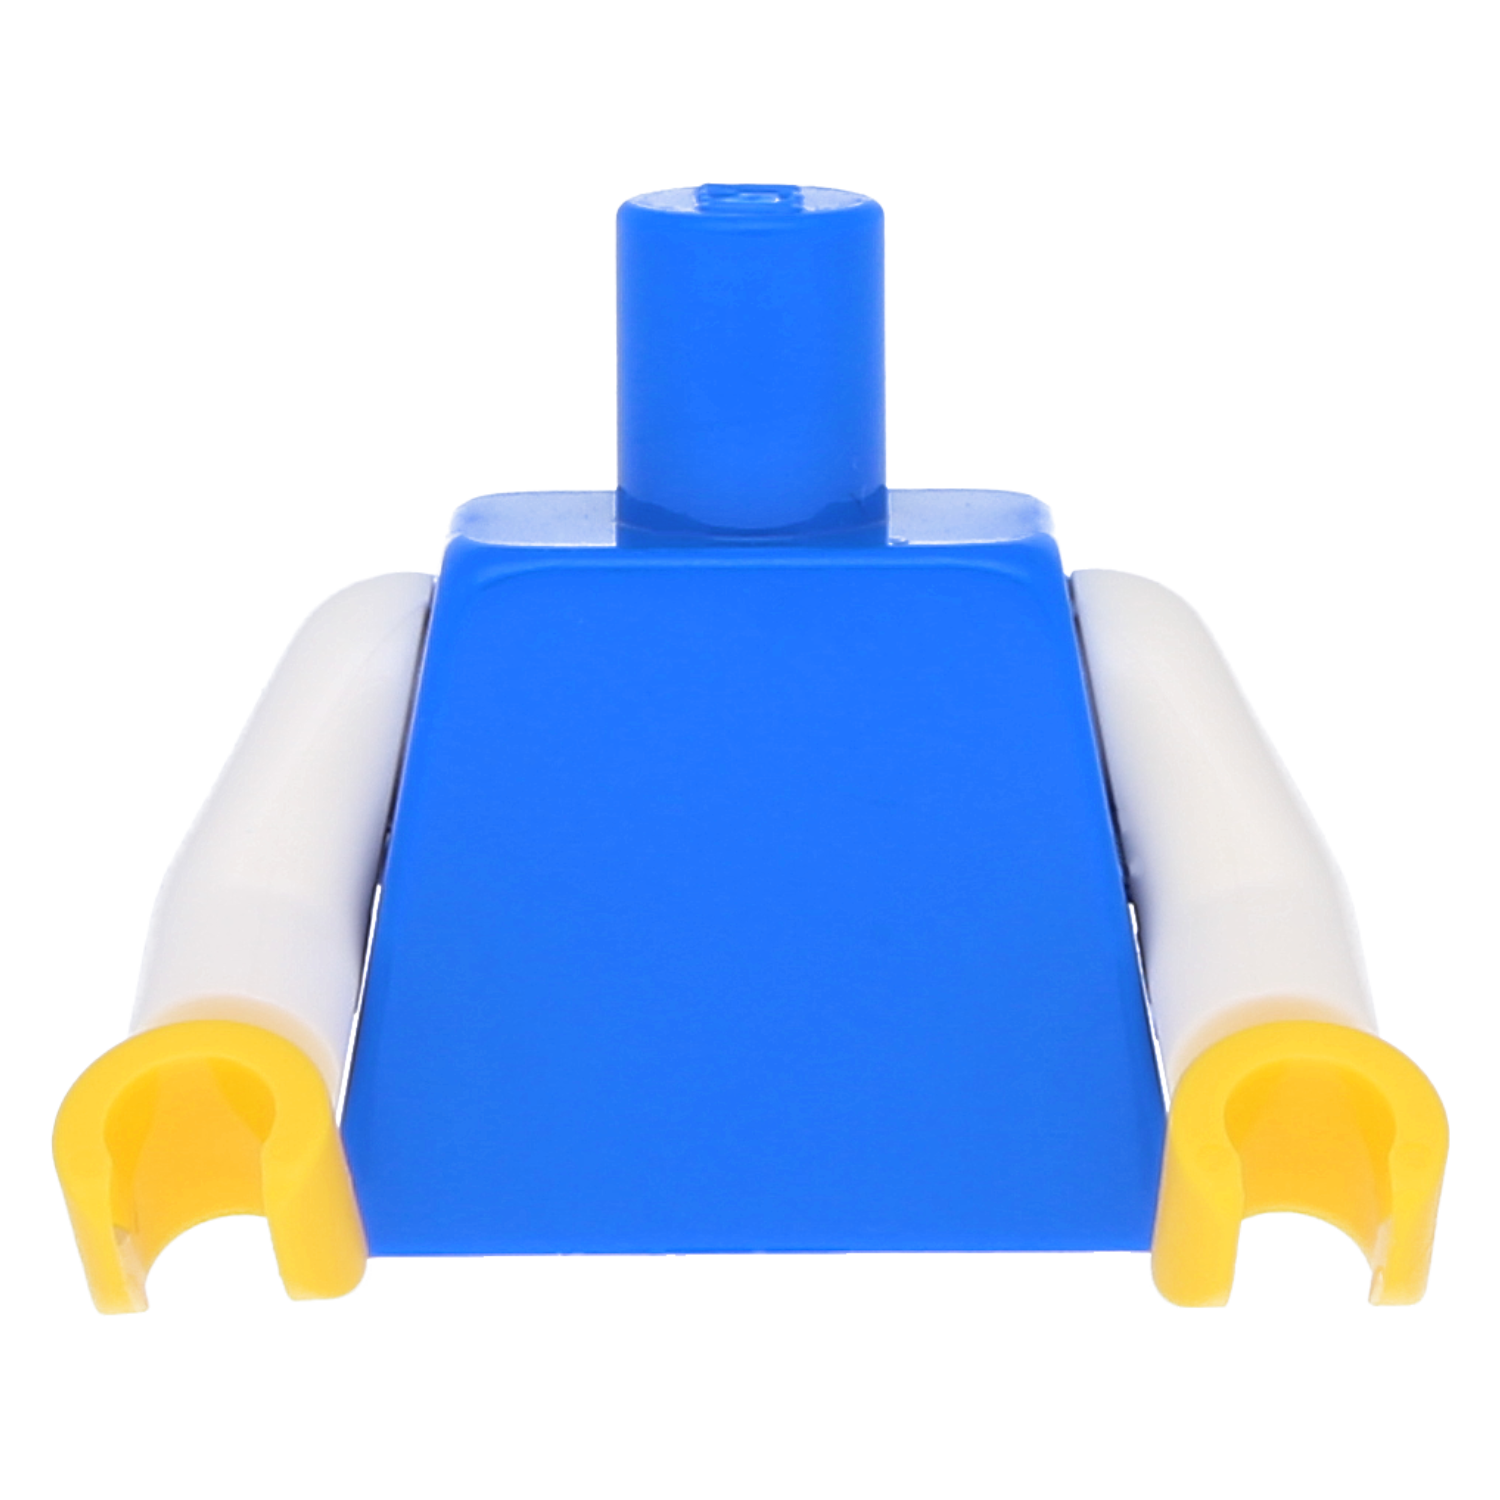 LEGO Minifigures upper body - white arms with yellow hands